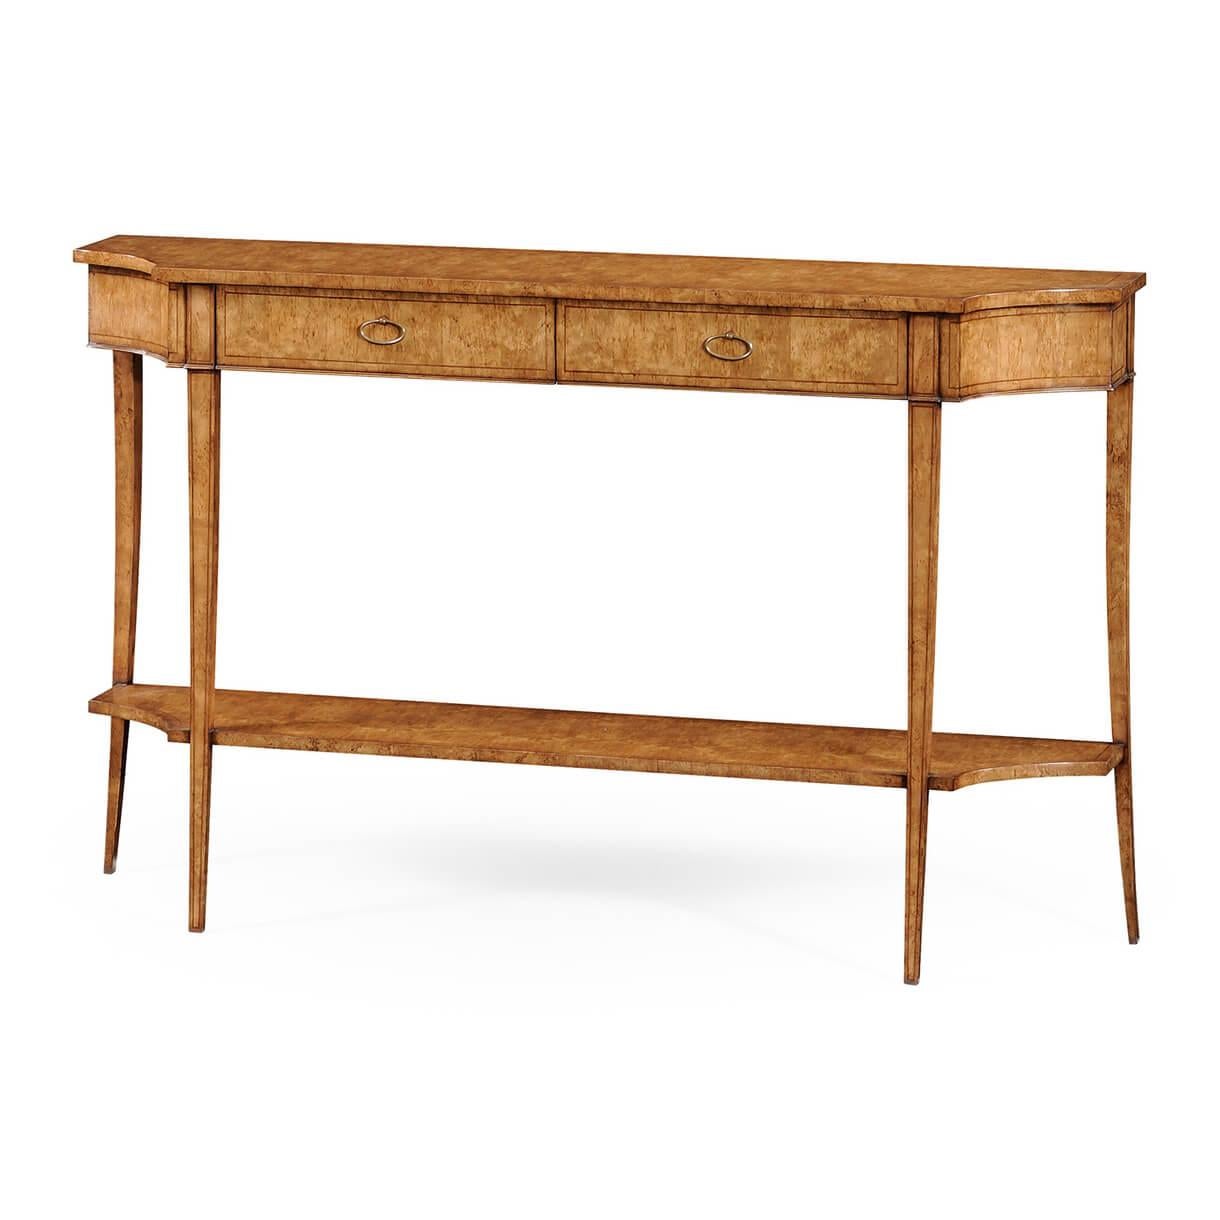 A Swedish neoclassic style birch veneered console table with incurved ends, a two-drawer frieze with squared sweeping and tapered legs, and a lower shelf stretcher base.

Dimensions: 58 7/8